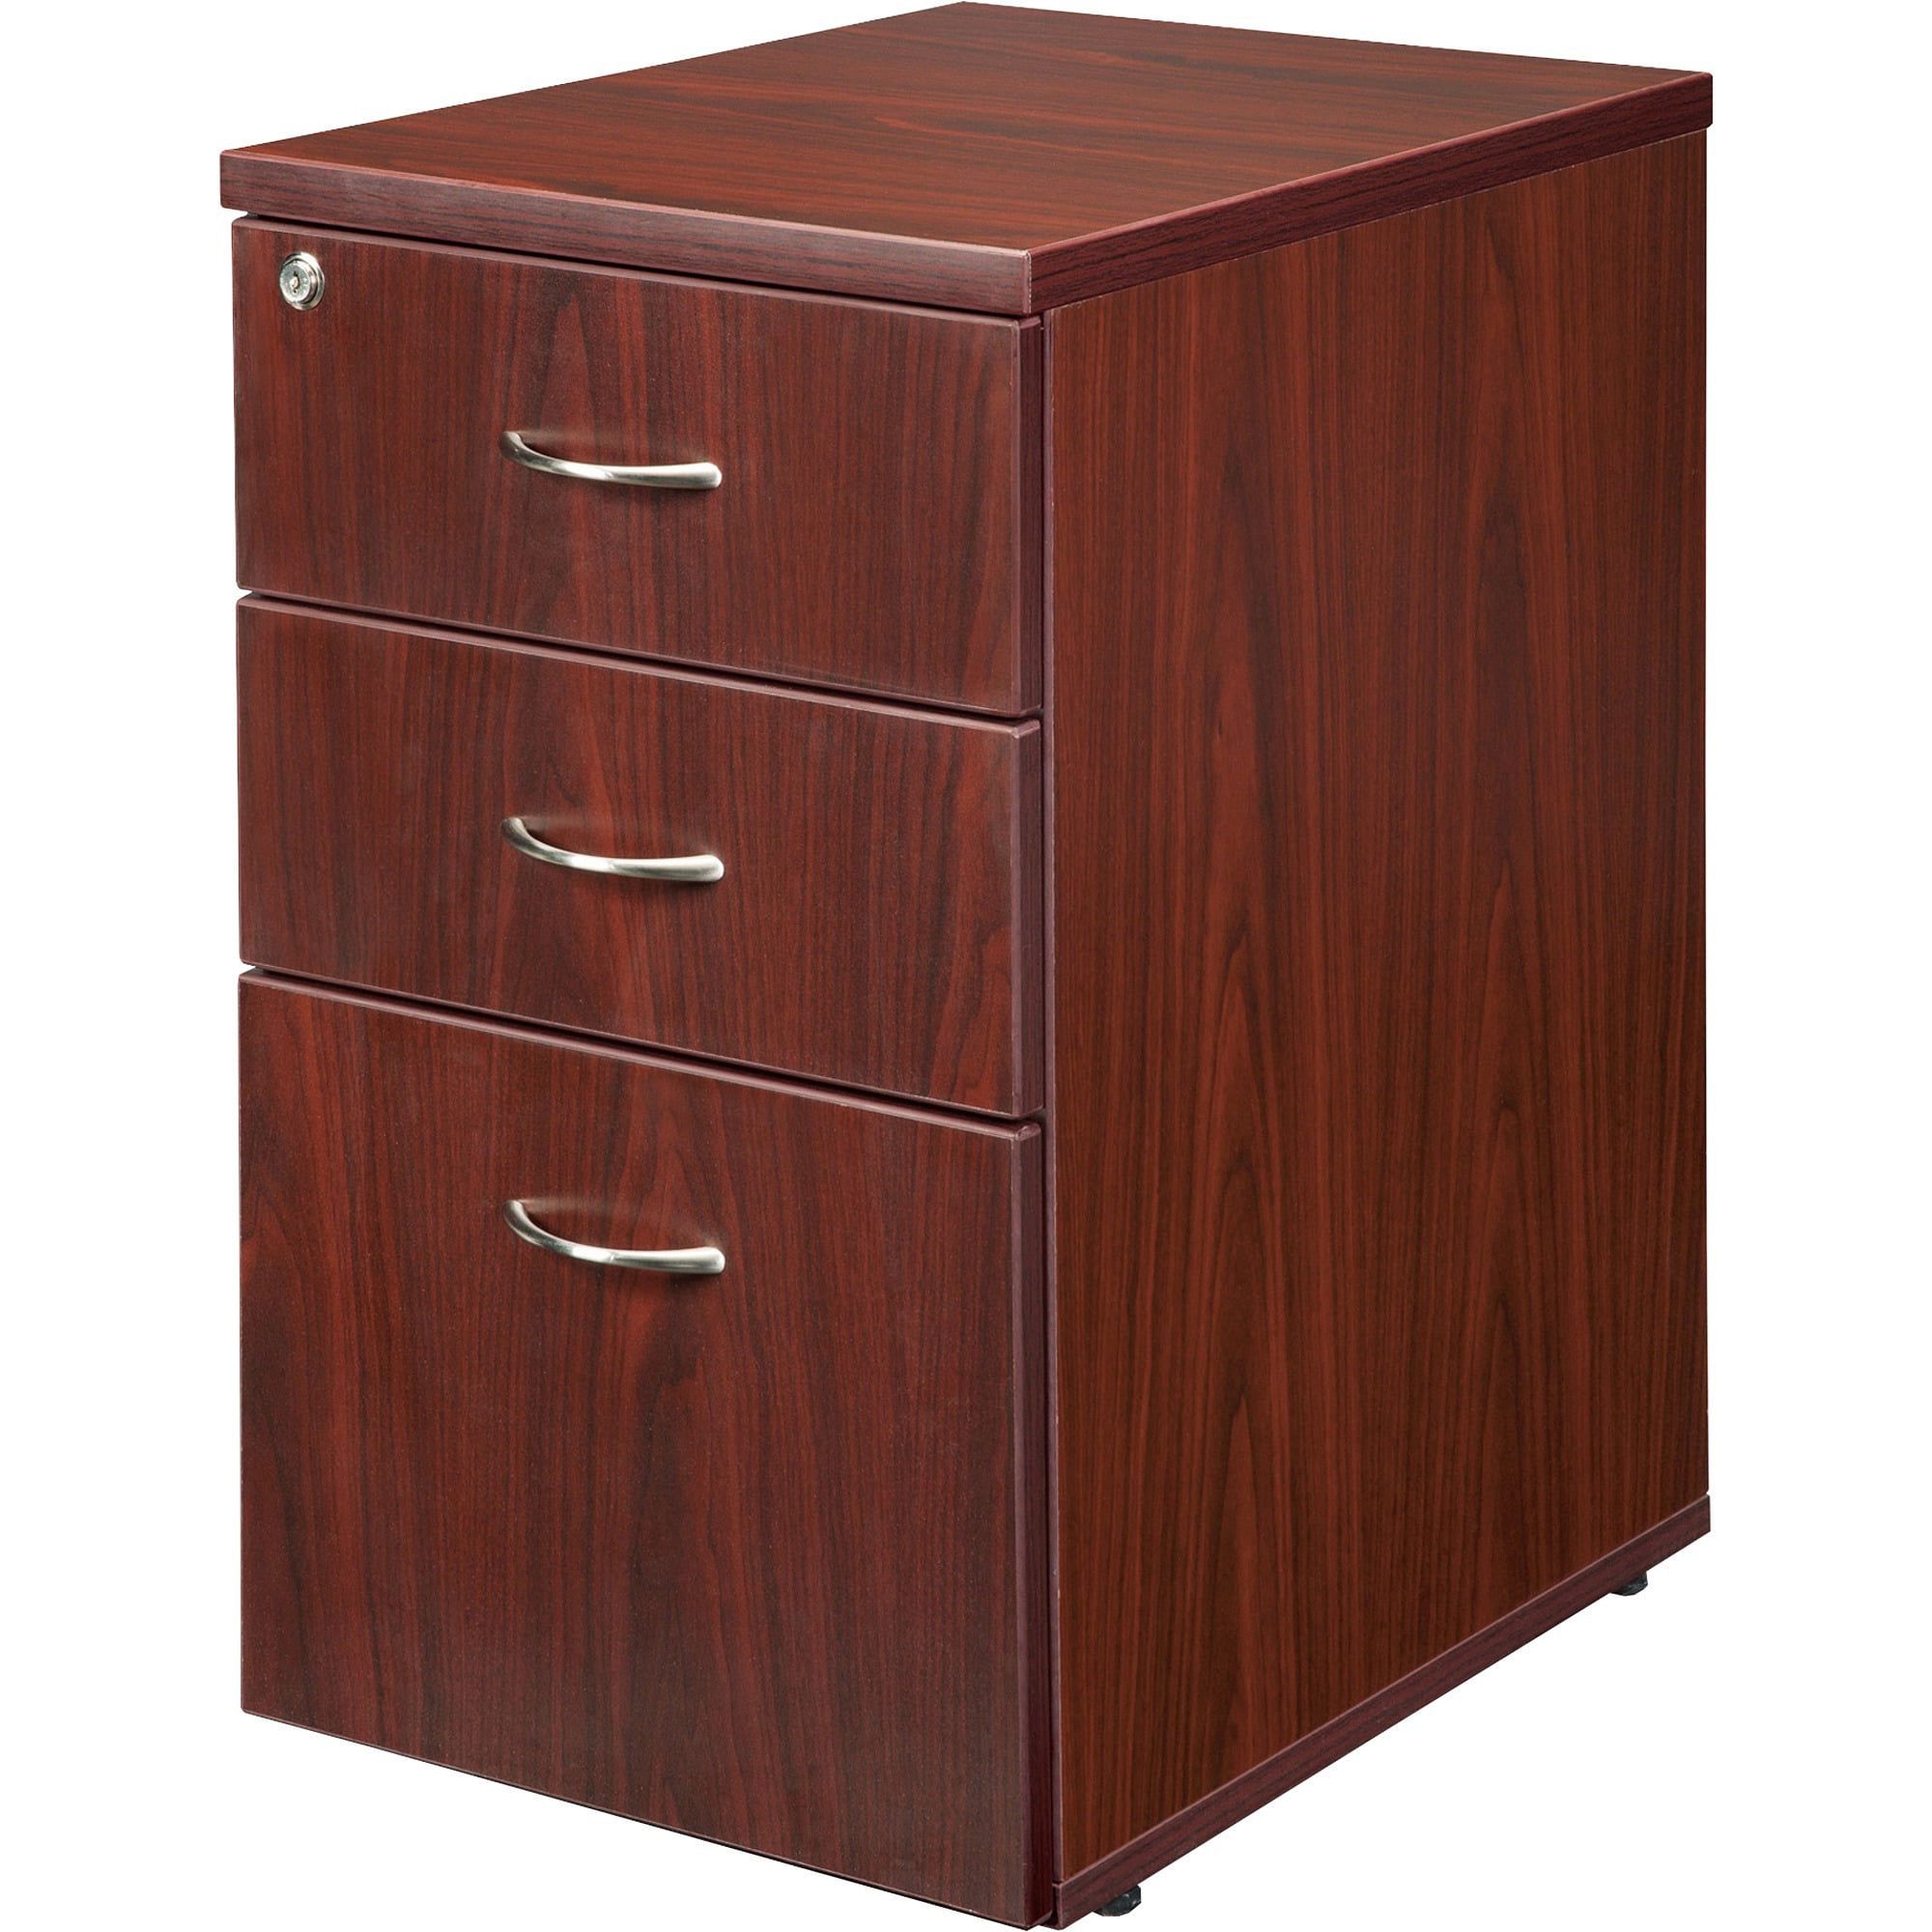 Wood Cabinet With Drawers With Regard To Popular 3 Drawers Vertical Wood Composite Lockable Filing Cabinet, – Walmart (View 15 of 15)